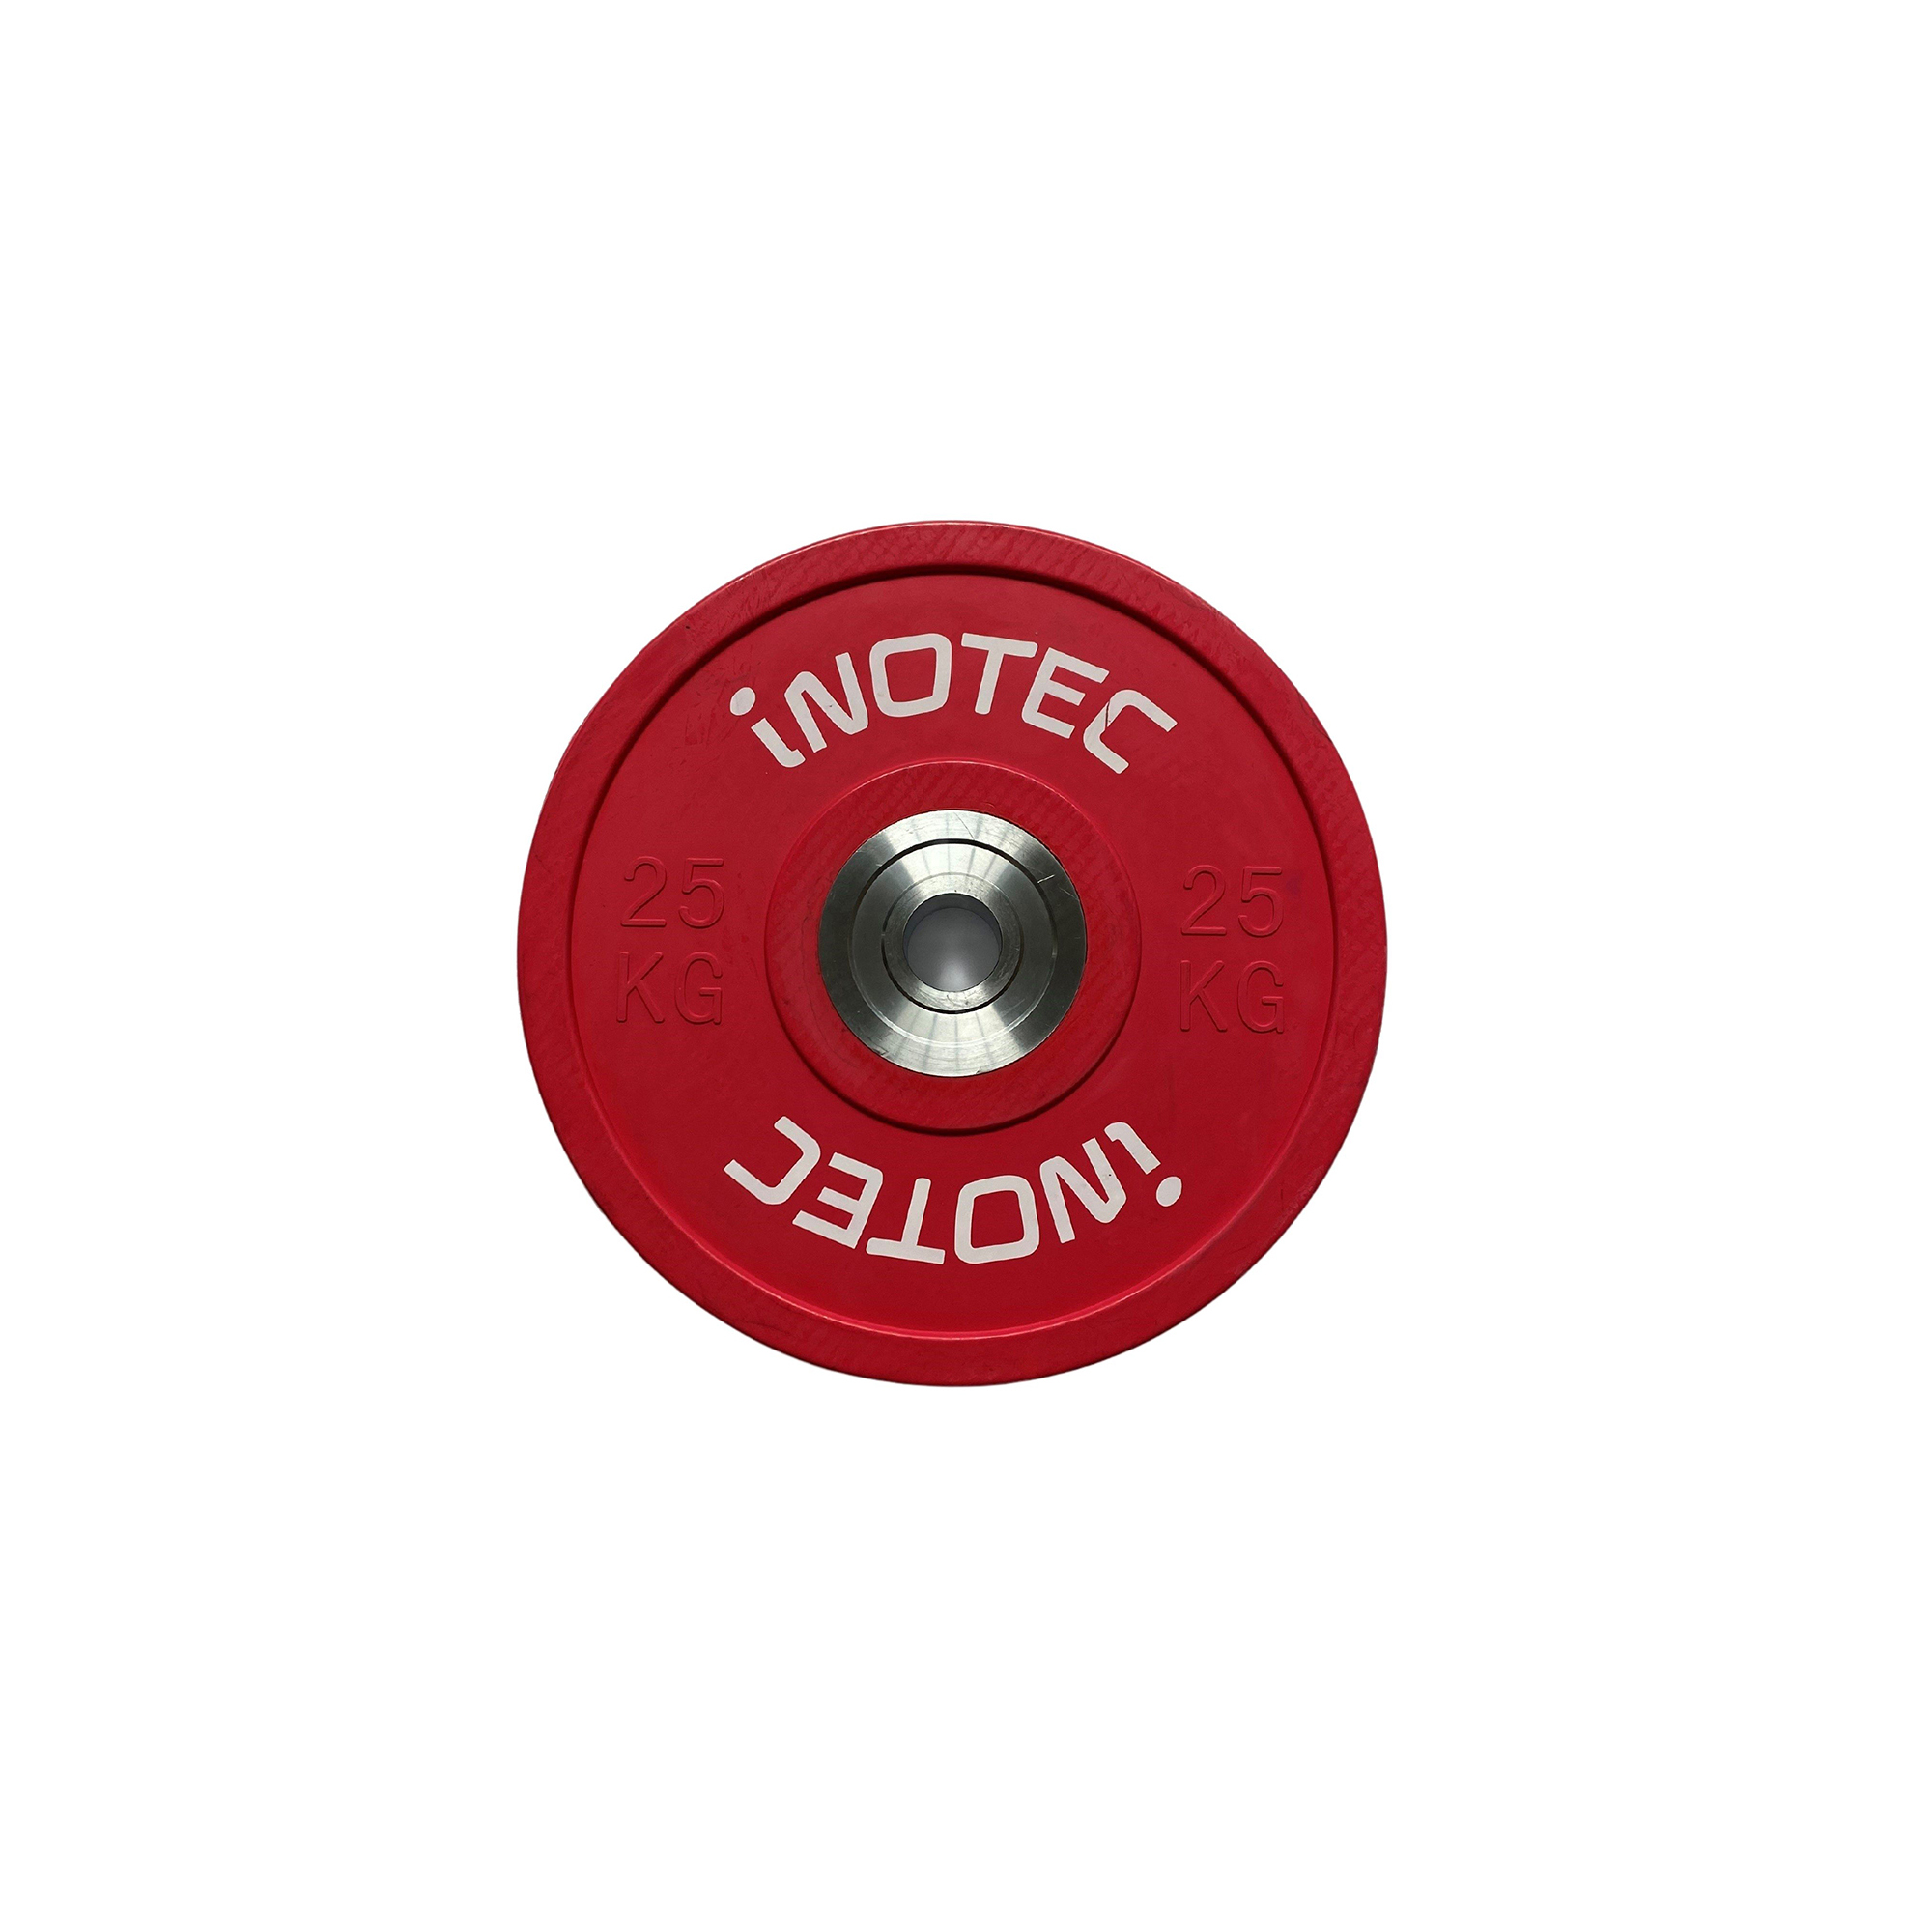 Inotec Competition Bumper Plate 25 kg (Stk) thumbnail